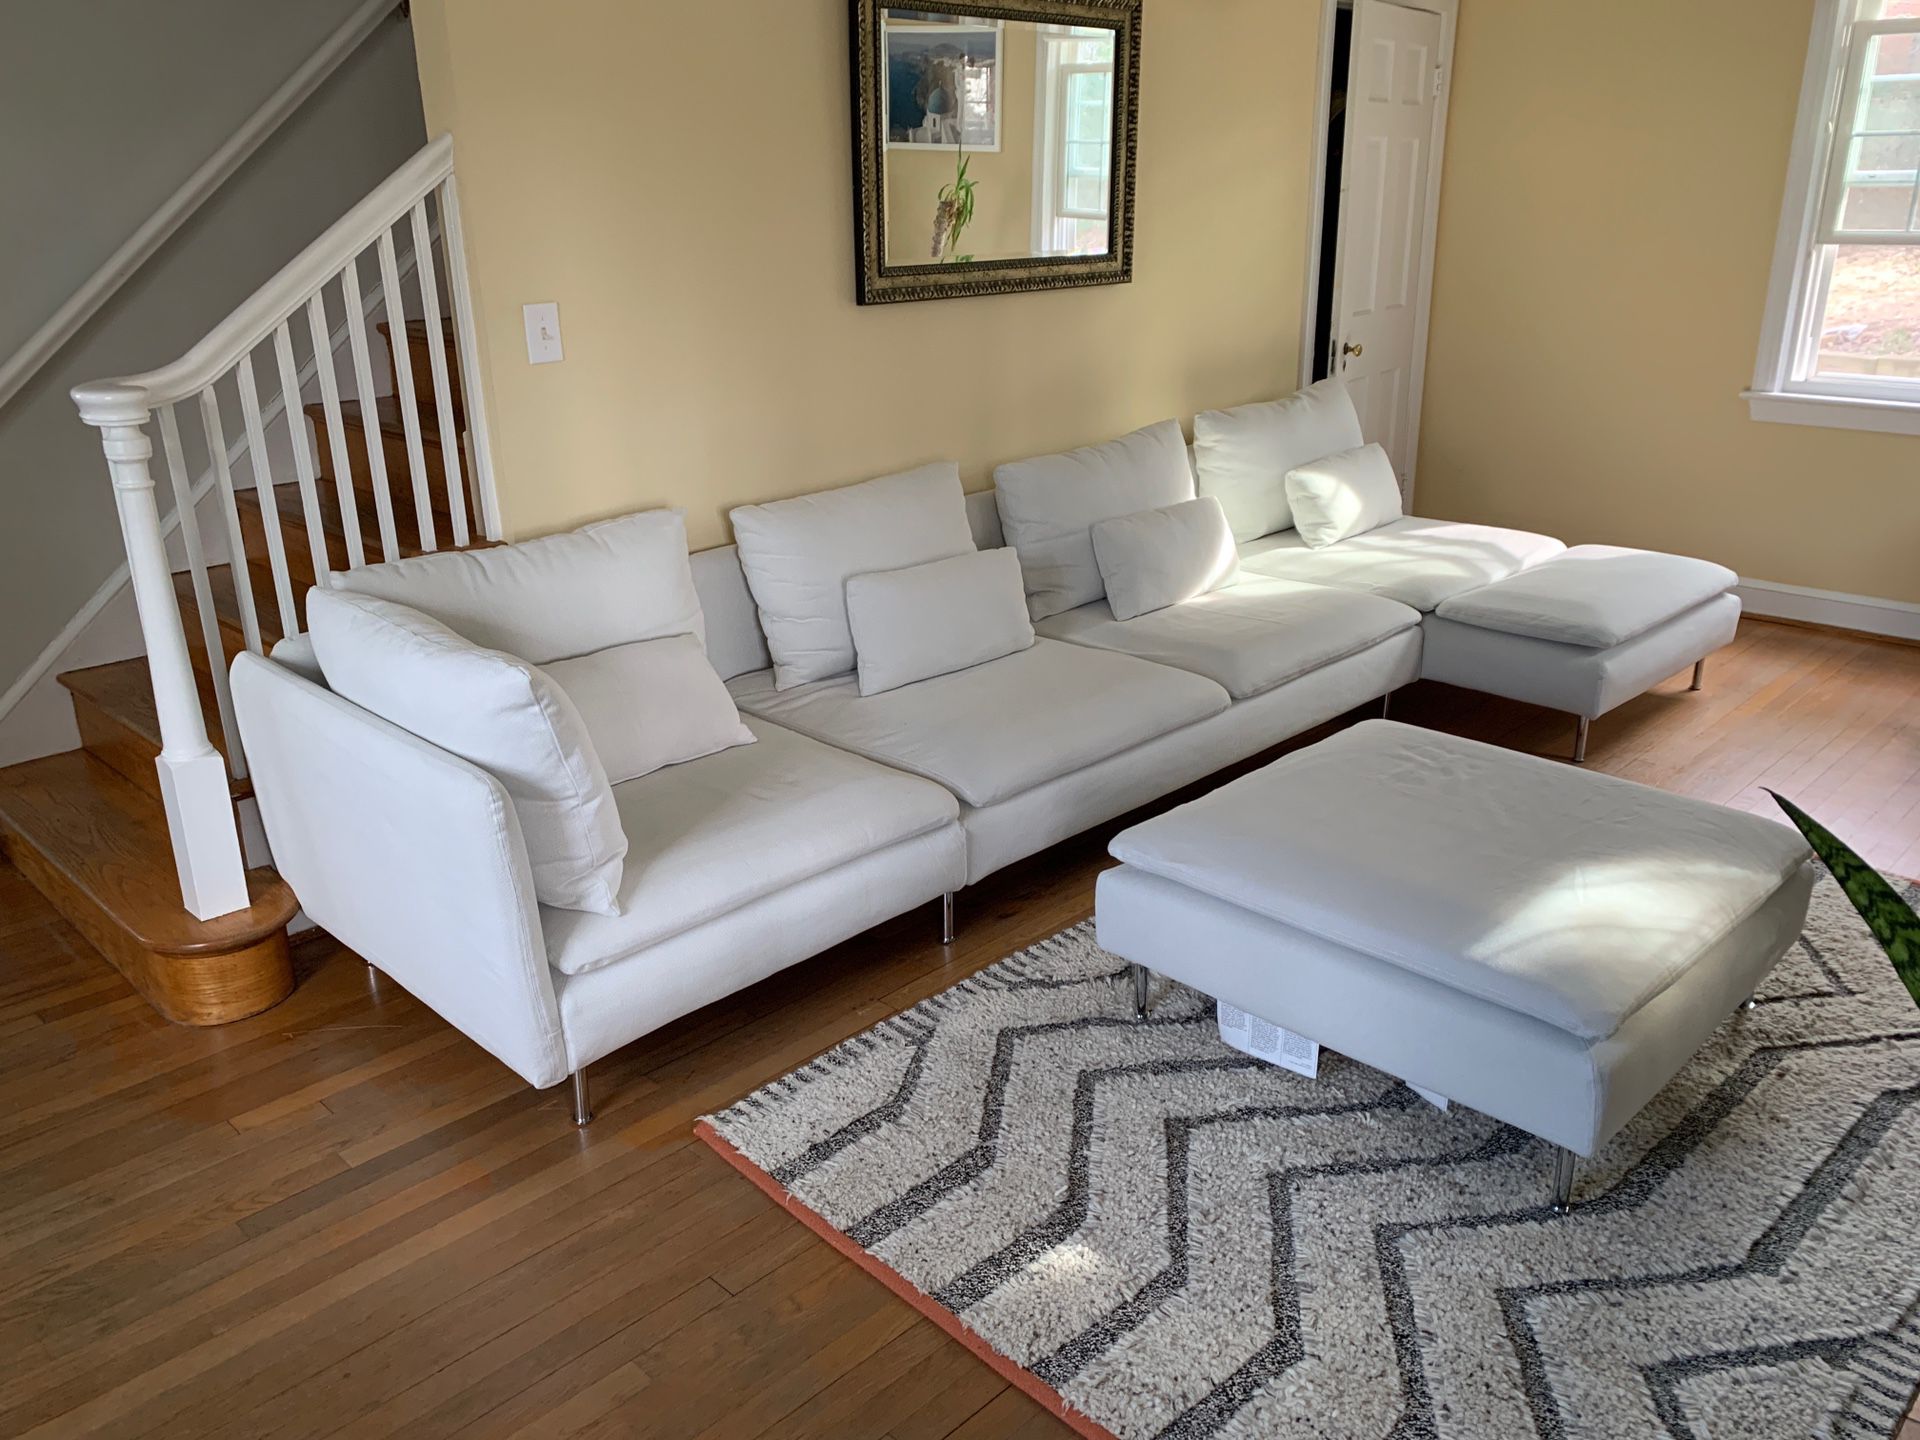 IKEA white fabric sectional couch with ottoman and pillows